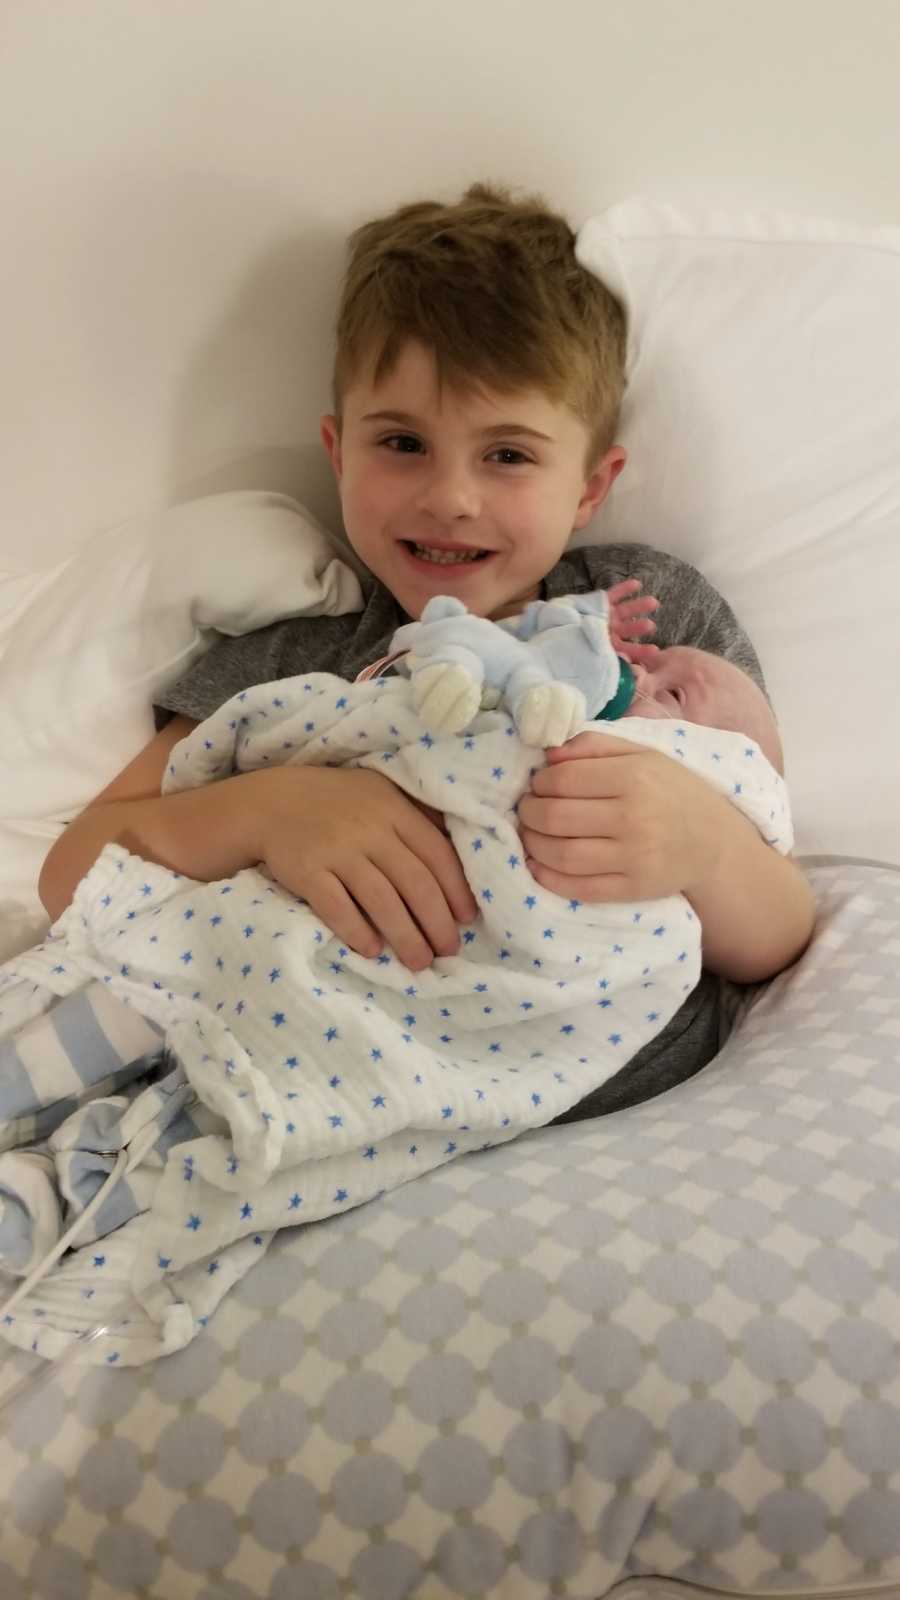 Young boy smiles holding newborn sibling in his lap